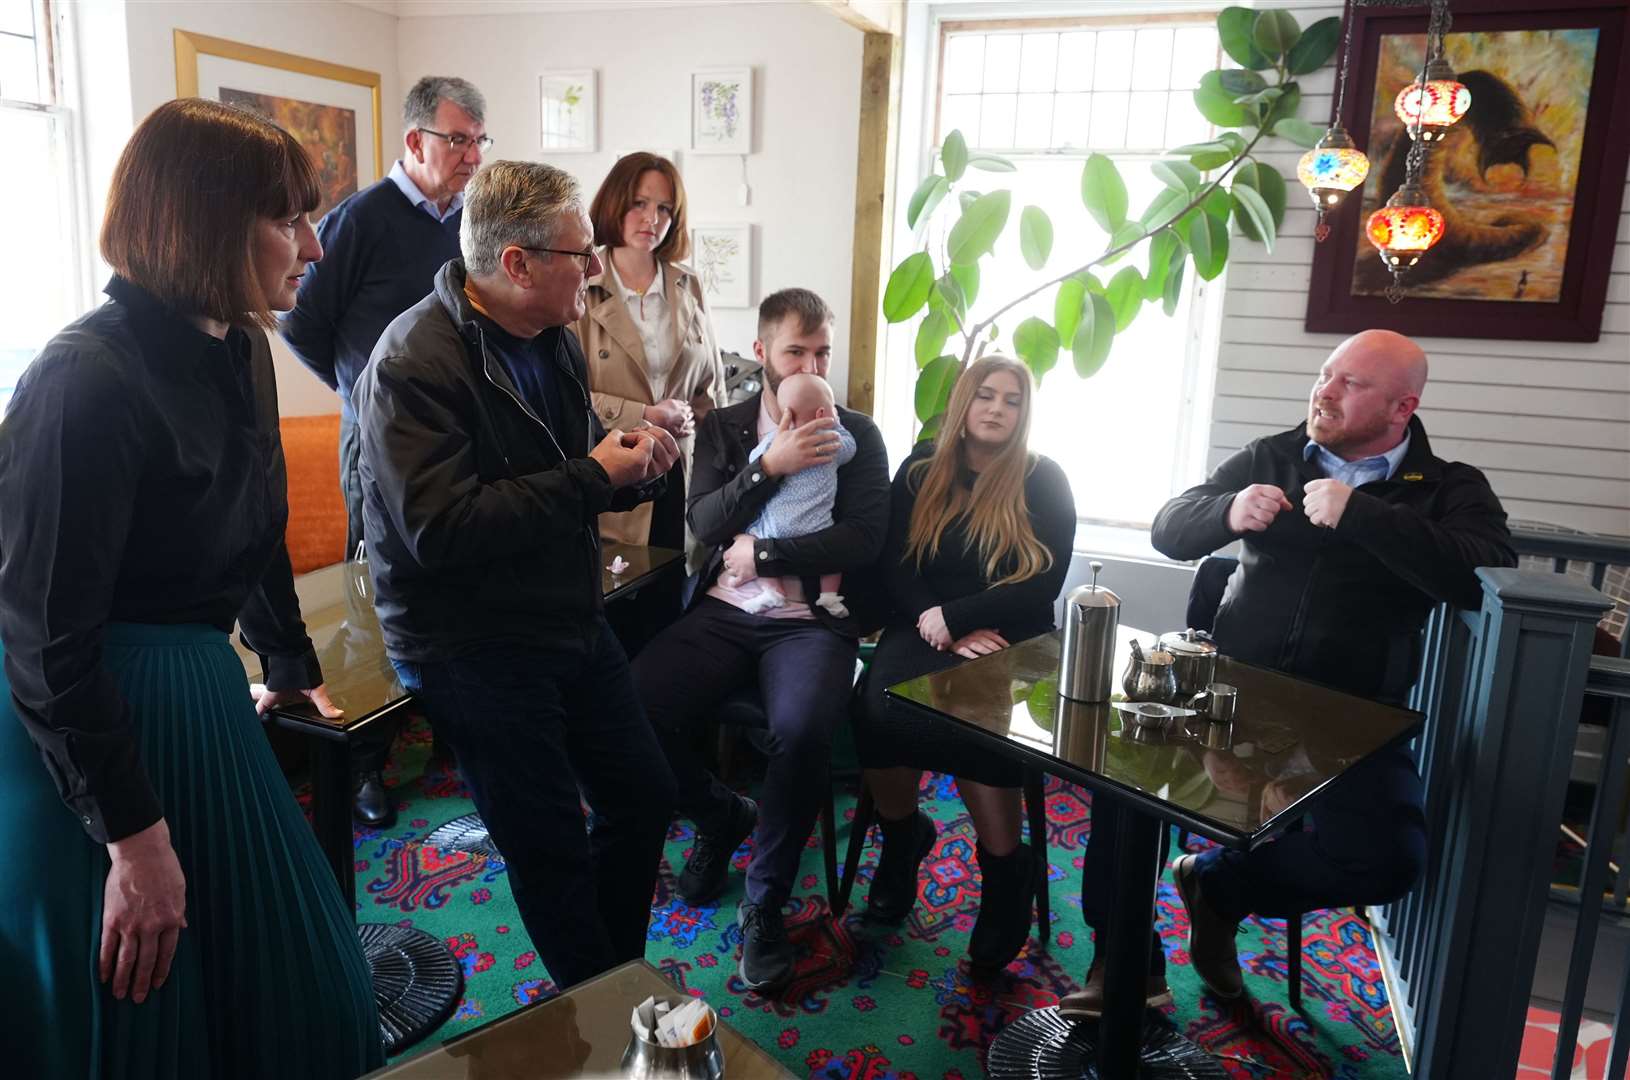 Labour leader Sir Keir Starmer and shadow chancellor Rachel Reeves in the Influence Cafe in Skinnergate, Darlington, during a visit to Teesside (Owen Humphreys/PA)